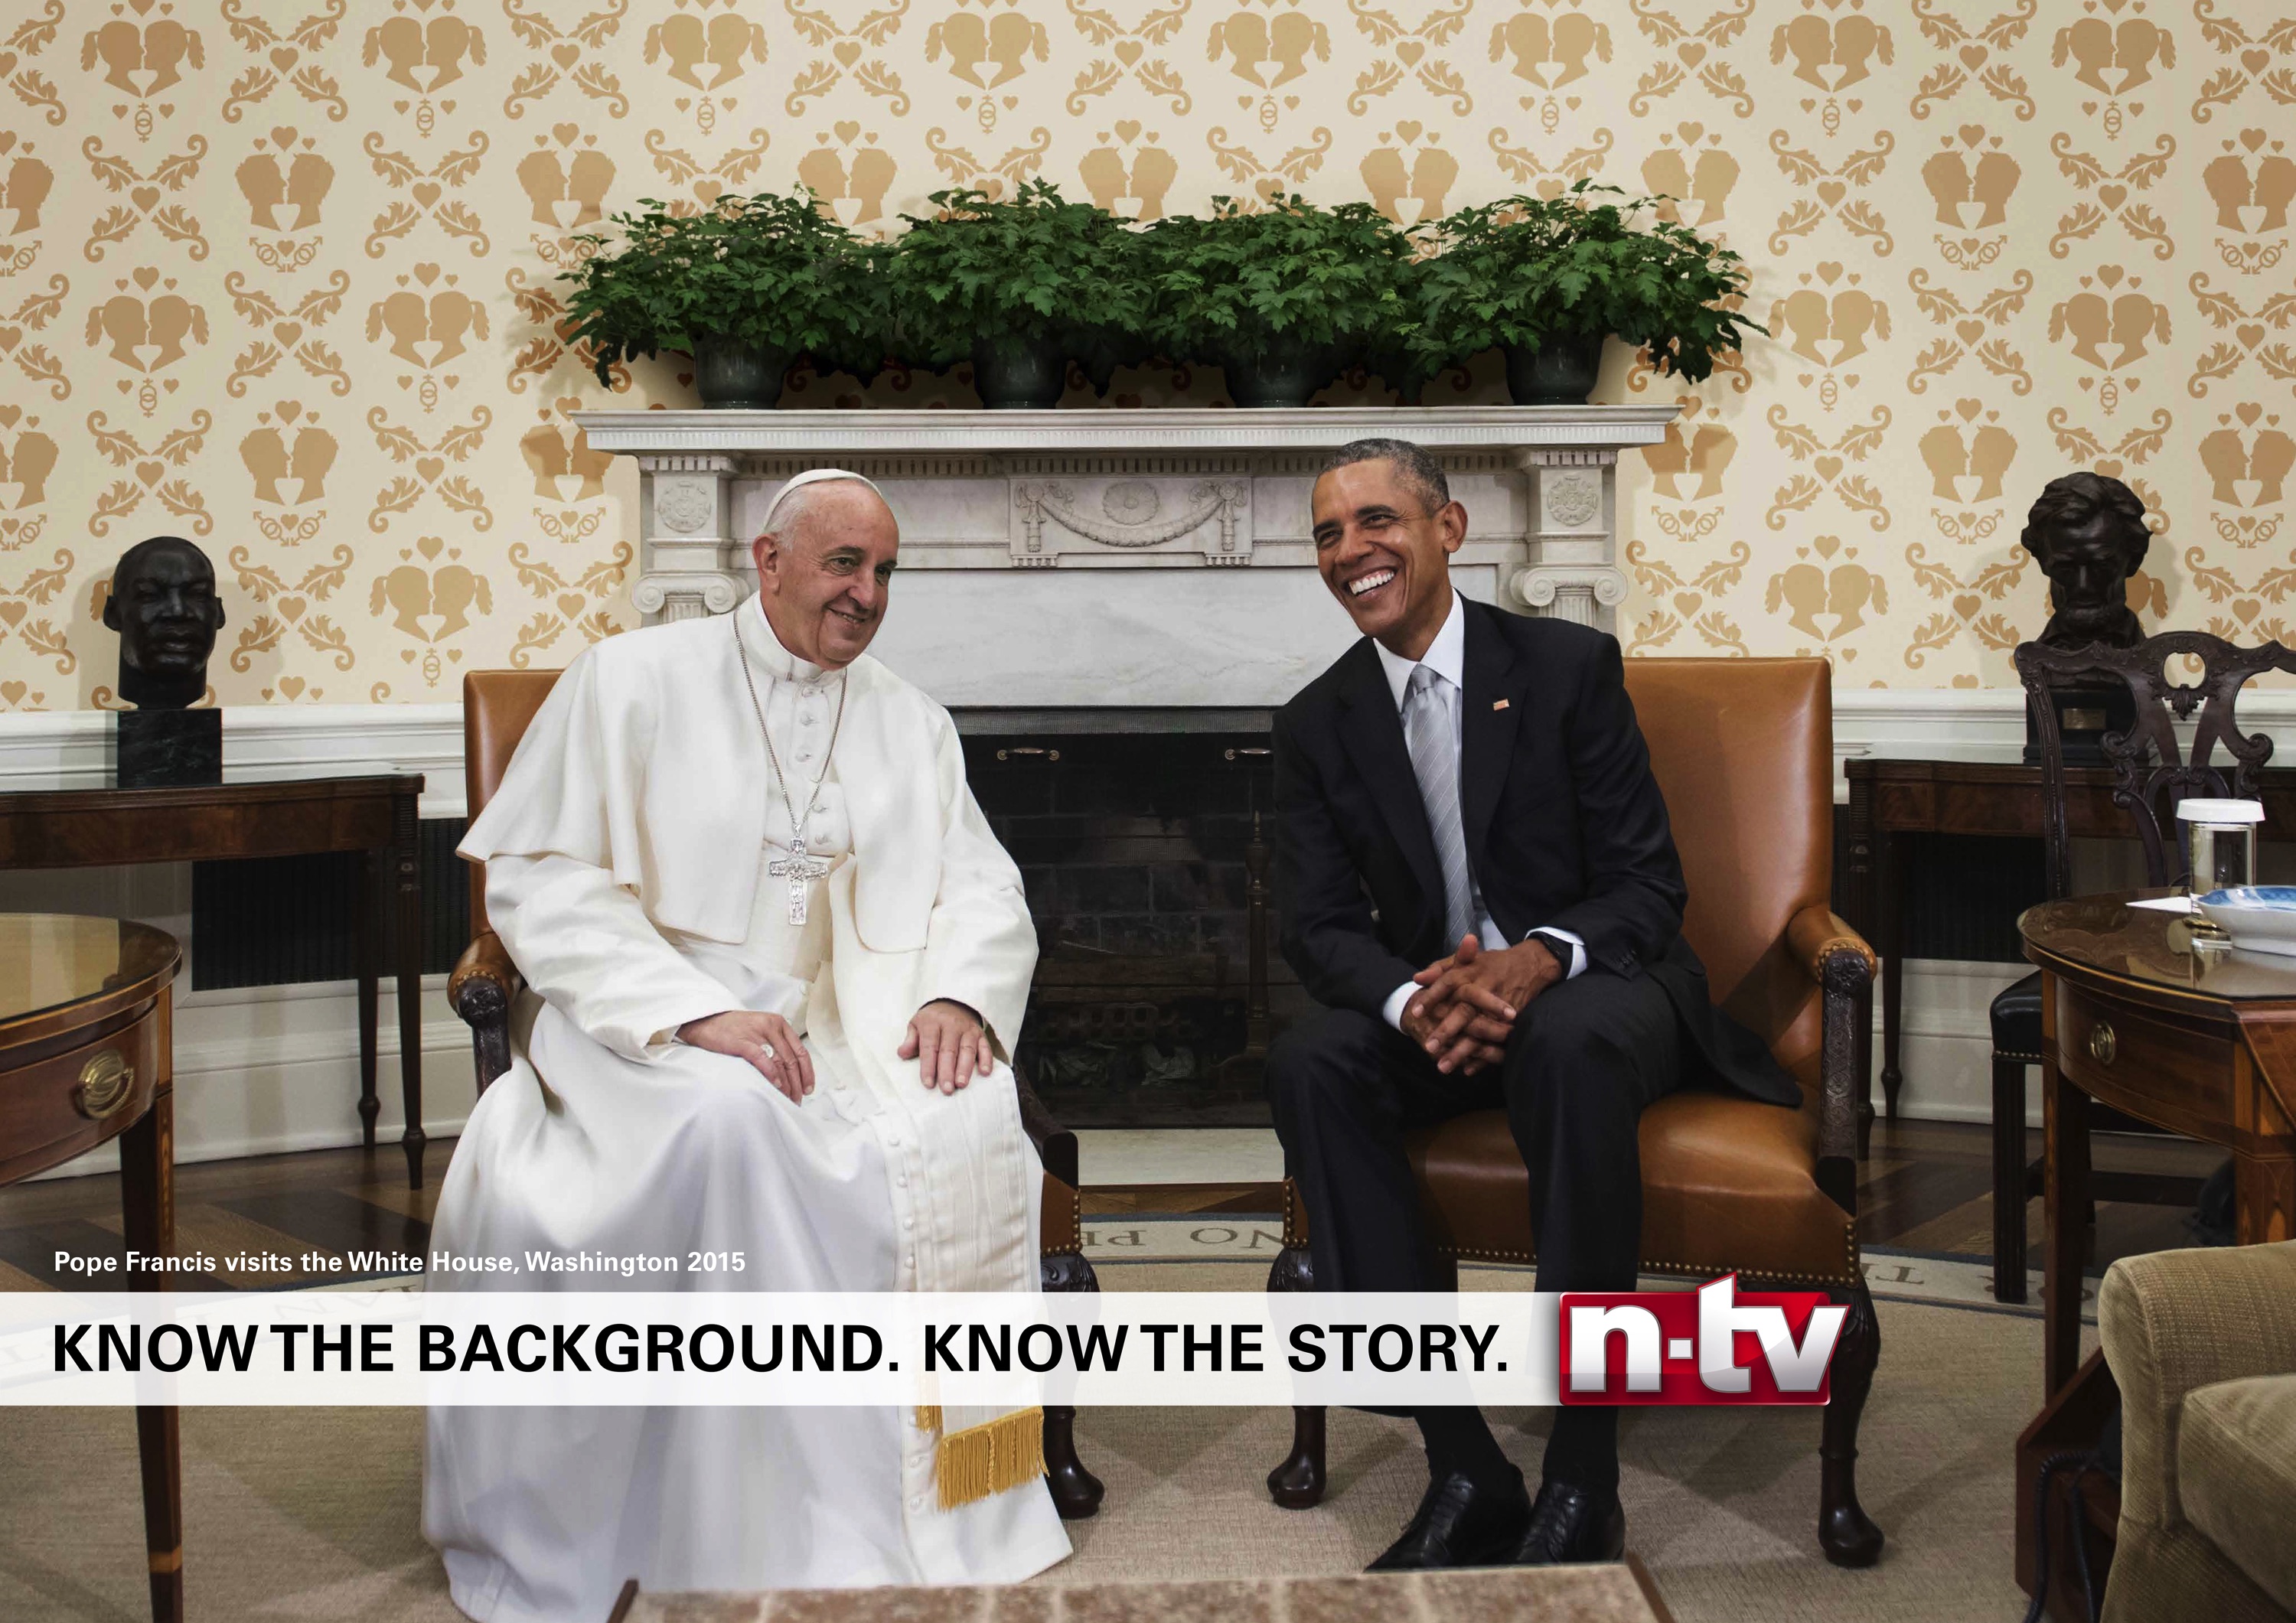 N-tv - Wallpaper - Pope Francis - Obama - Know The Backgrounds Ntv - HD Wallpaper 